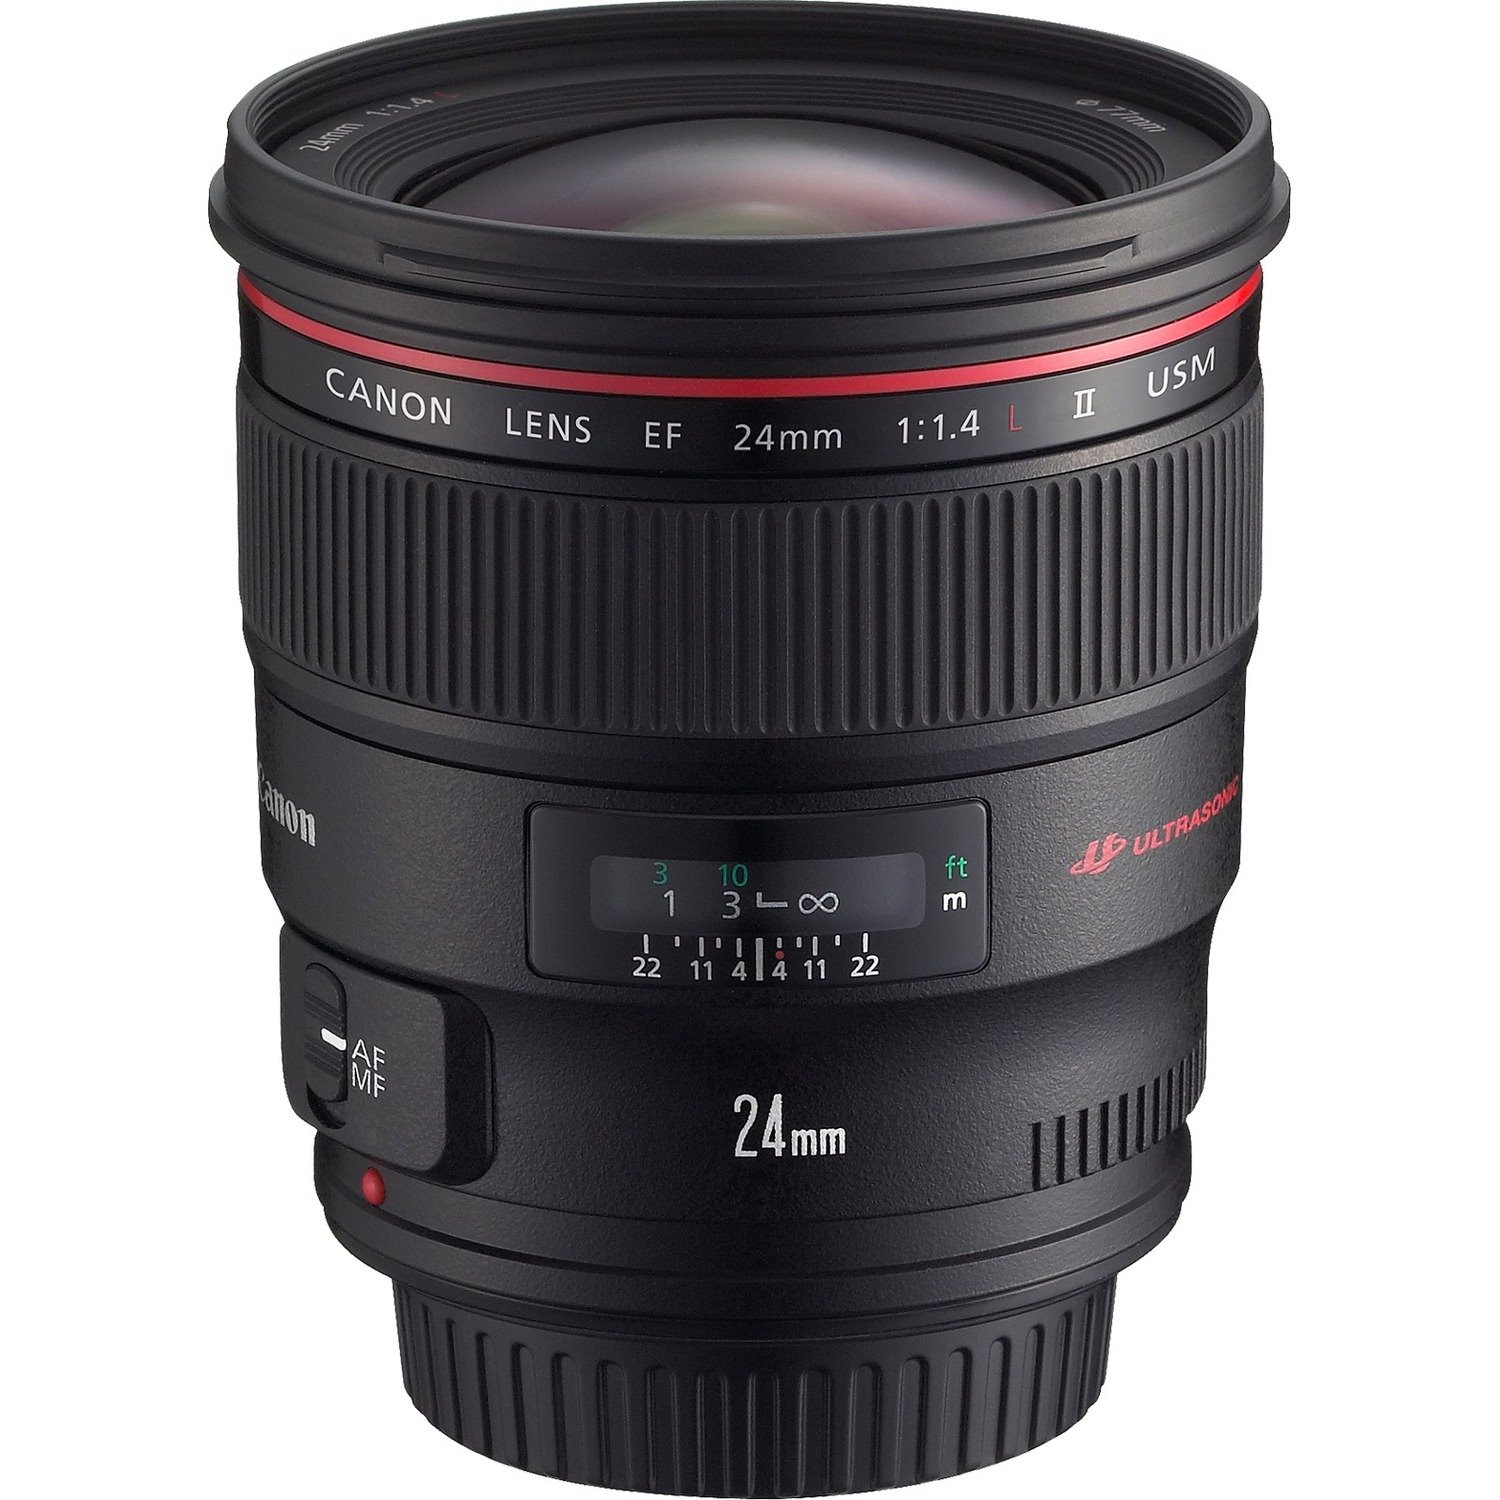 Canon - 24 mmf/1.4 - Wide Angle Fixed Lens for Canon EF